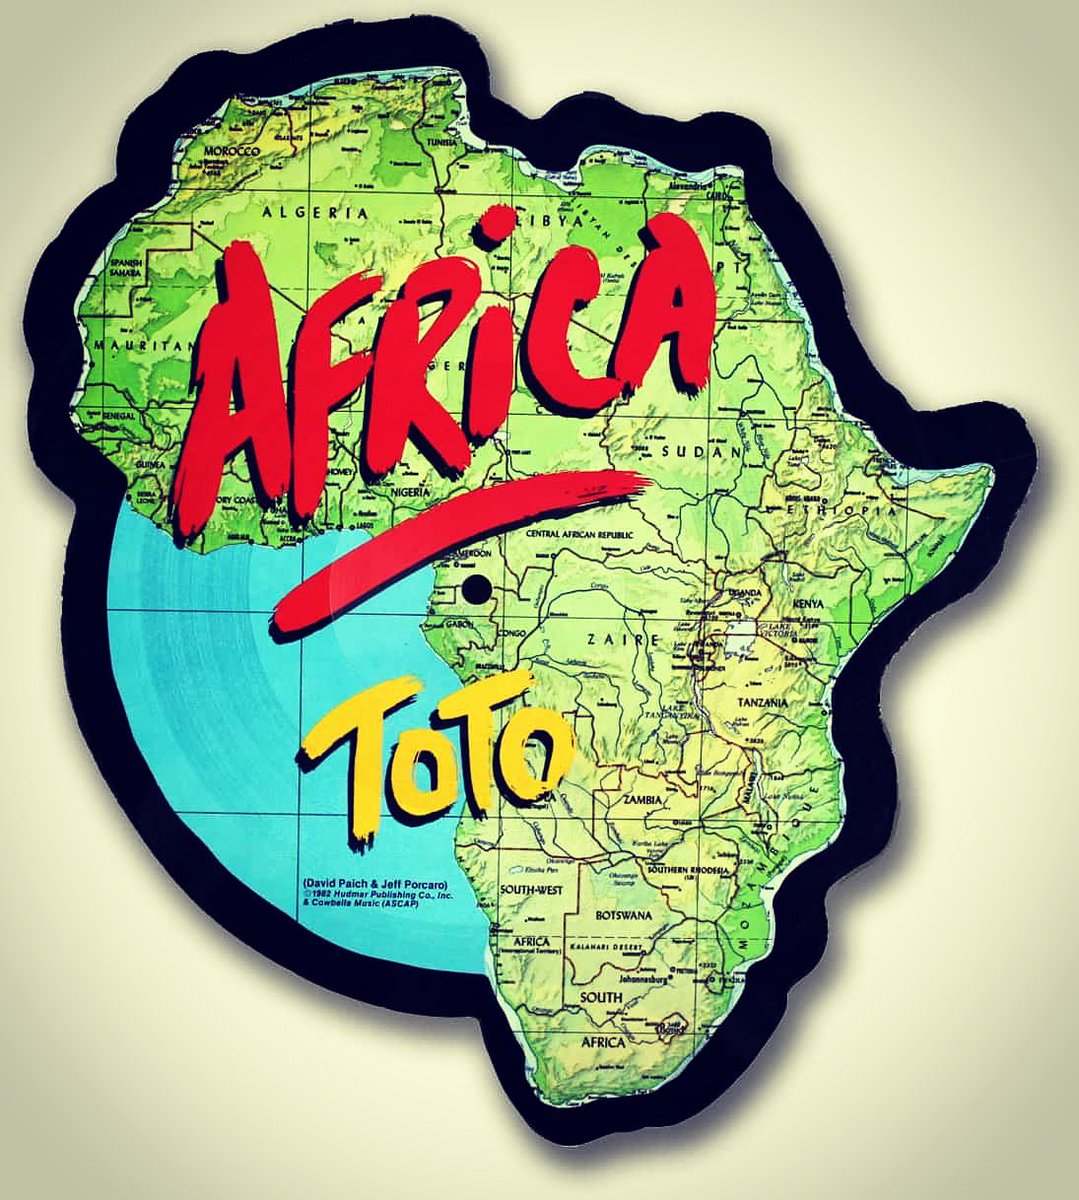 Today 36 years ago in 1982 one of Toto's biggest hits 'Africa' was released in the US. #milestone #IV @toto99com @stevelukather @StevePmusica @dashlrow